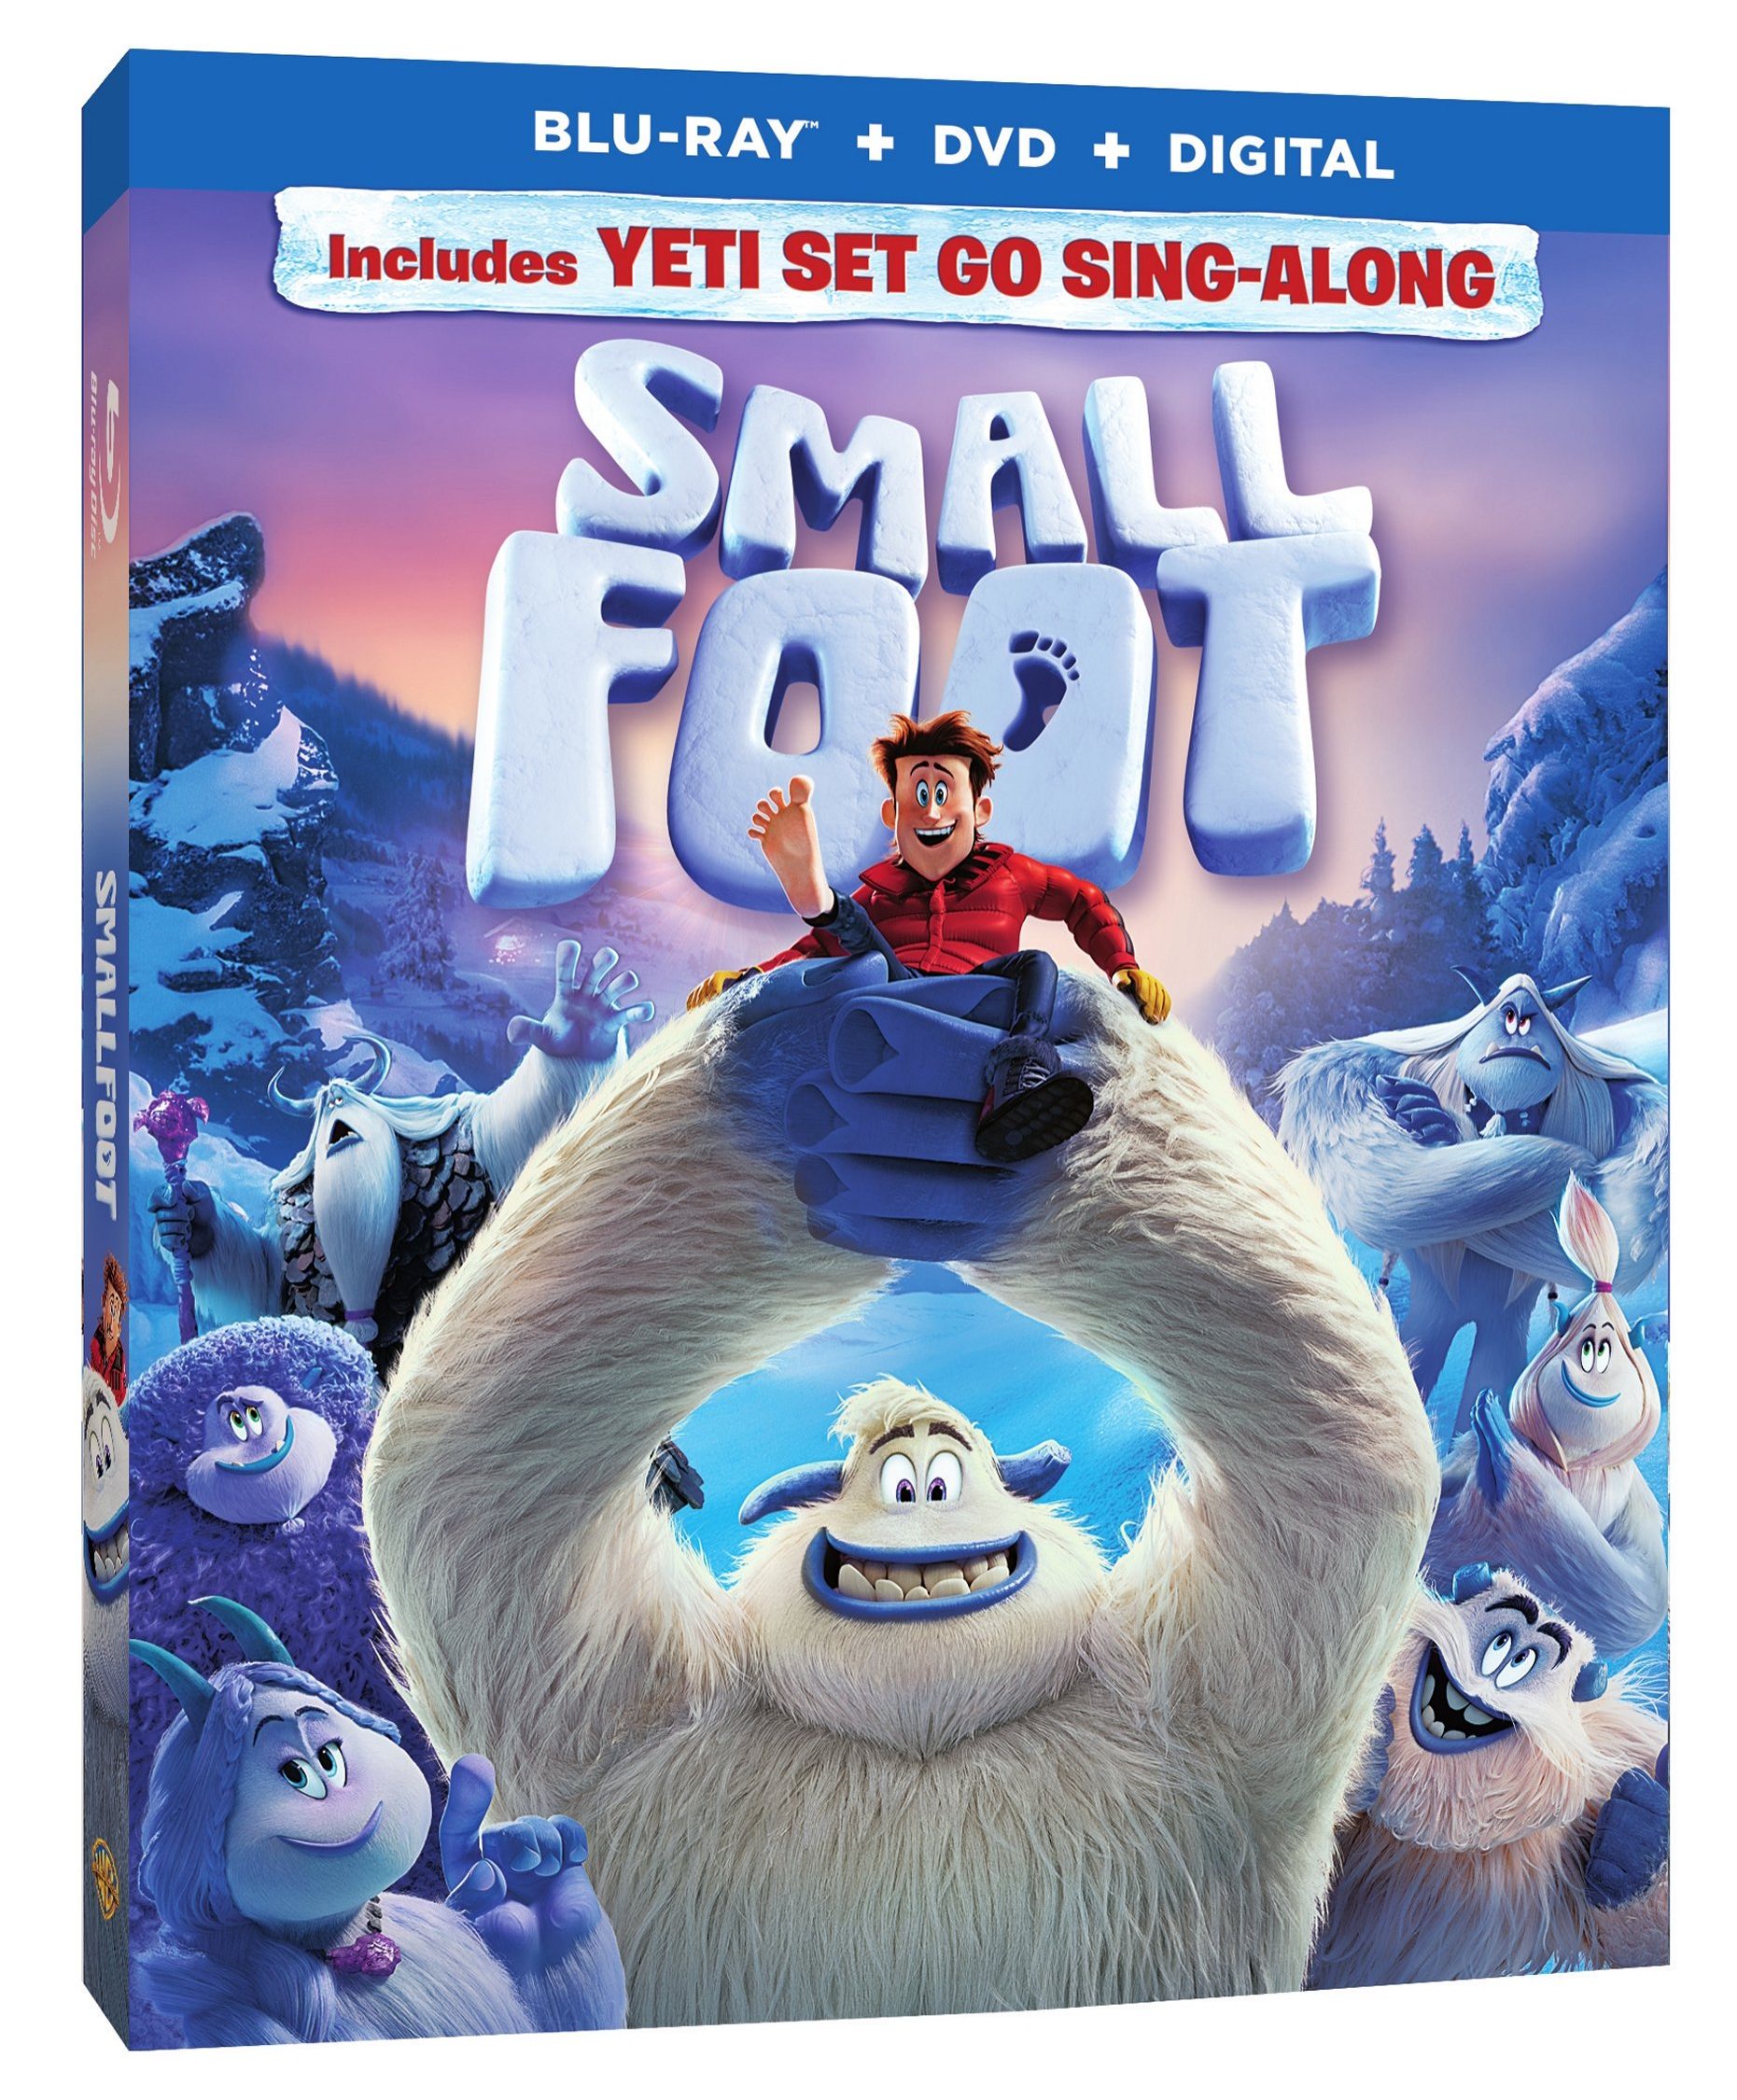 Smallfoot Blu-ray and DVD #SMALLFOOT #movie #giveaway #ad